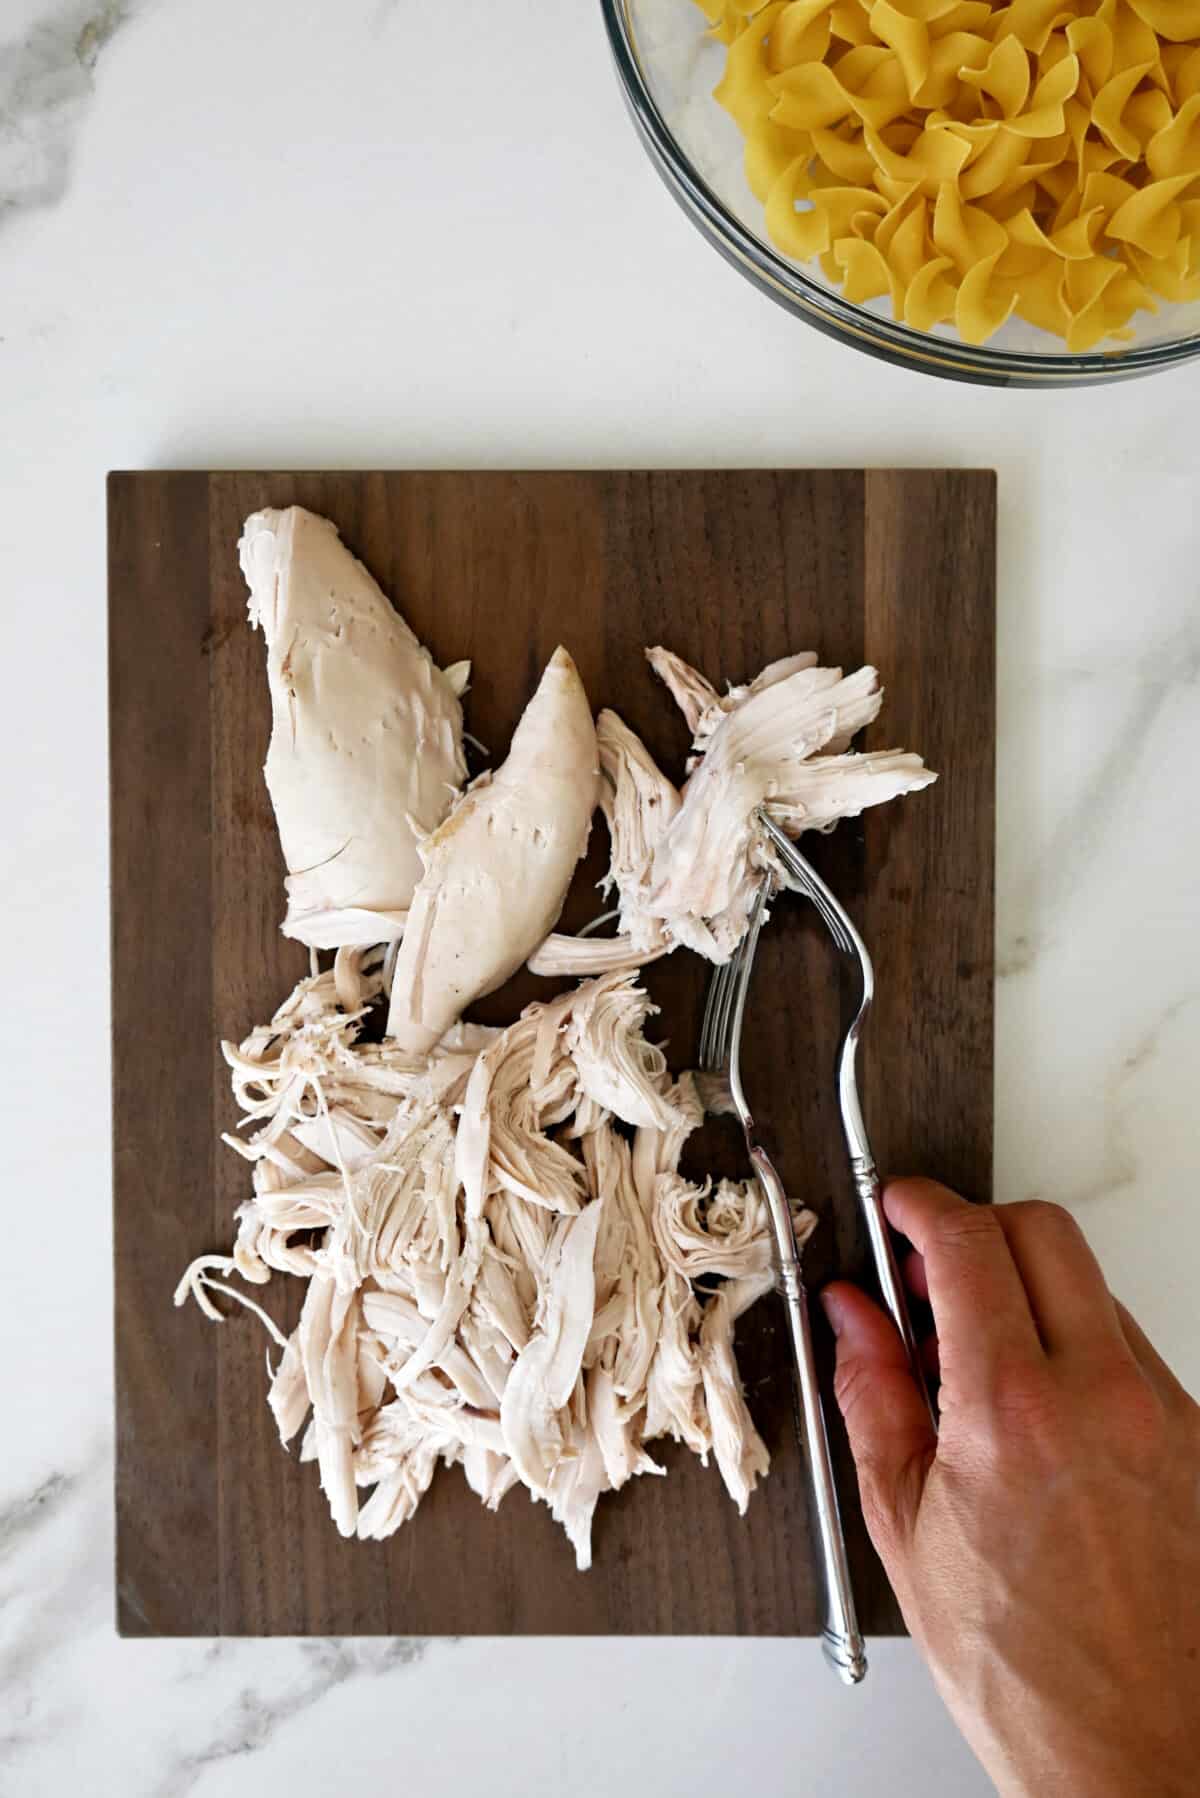 A woman's hand reaches for one of two forks on a cutting board with shredded chicken.